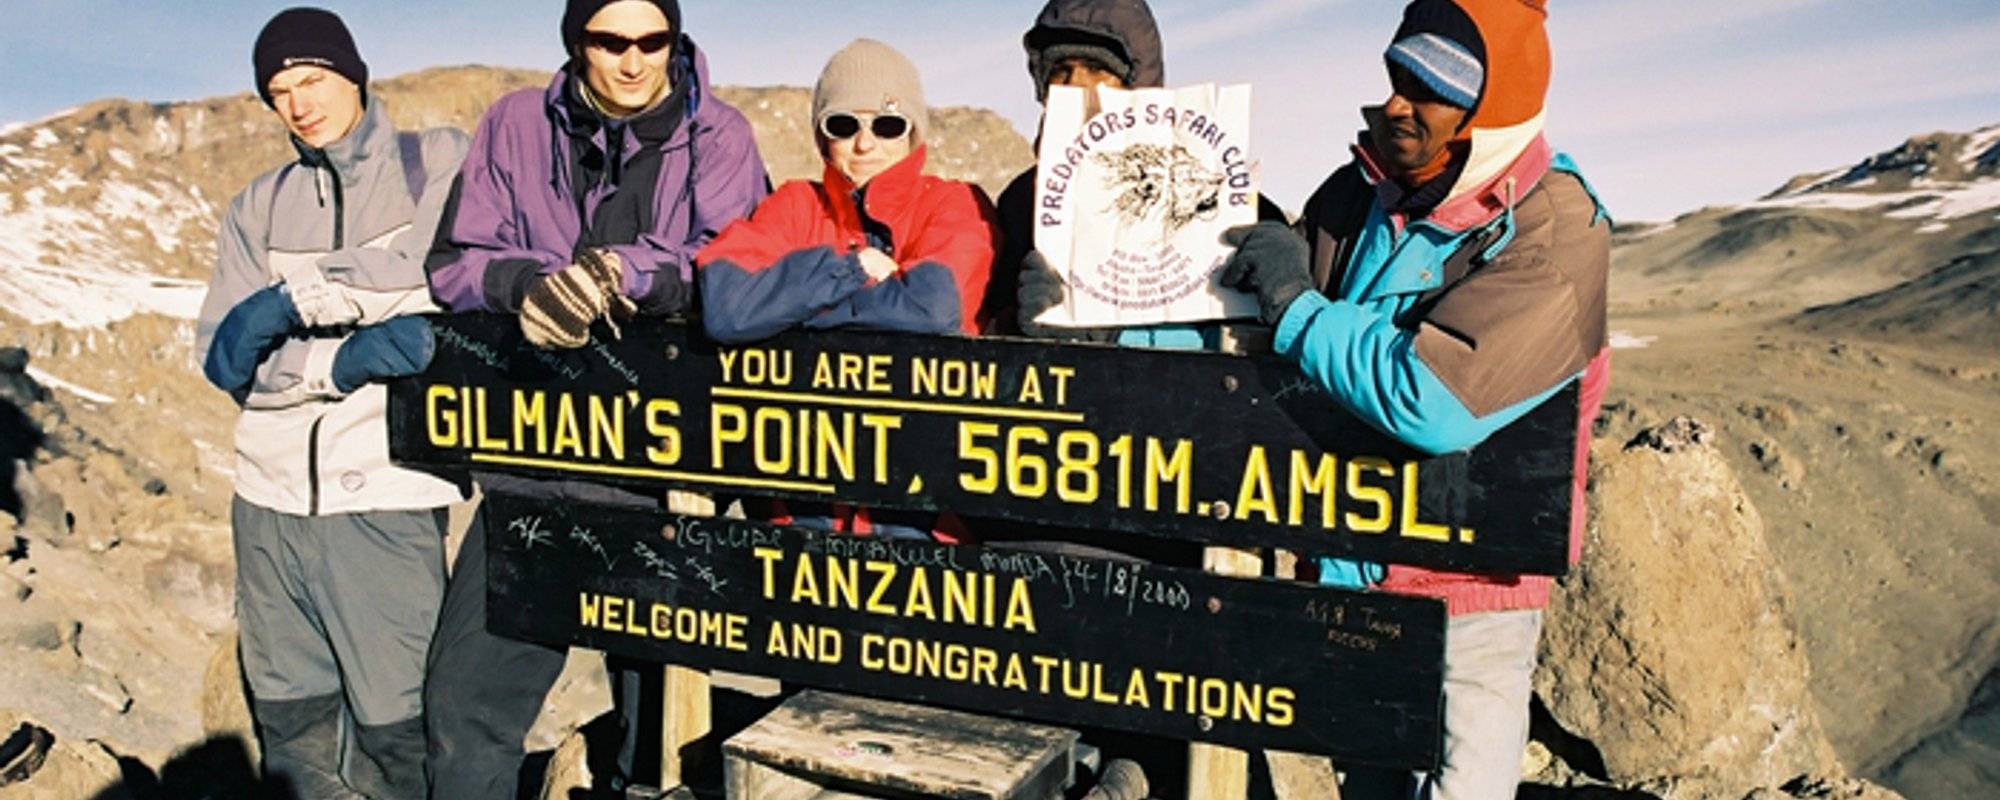 Tanzania – to the top of Mt. Kilimanjaro (5.895m) with my sons